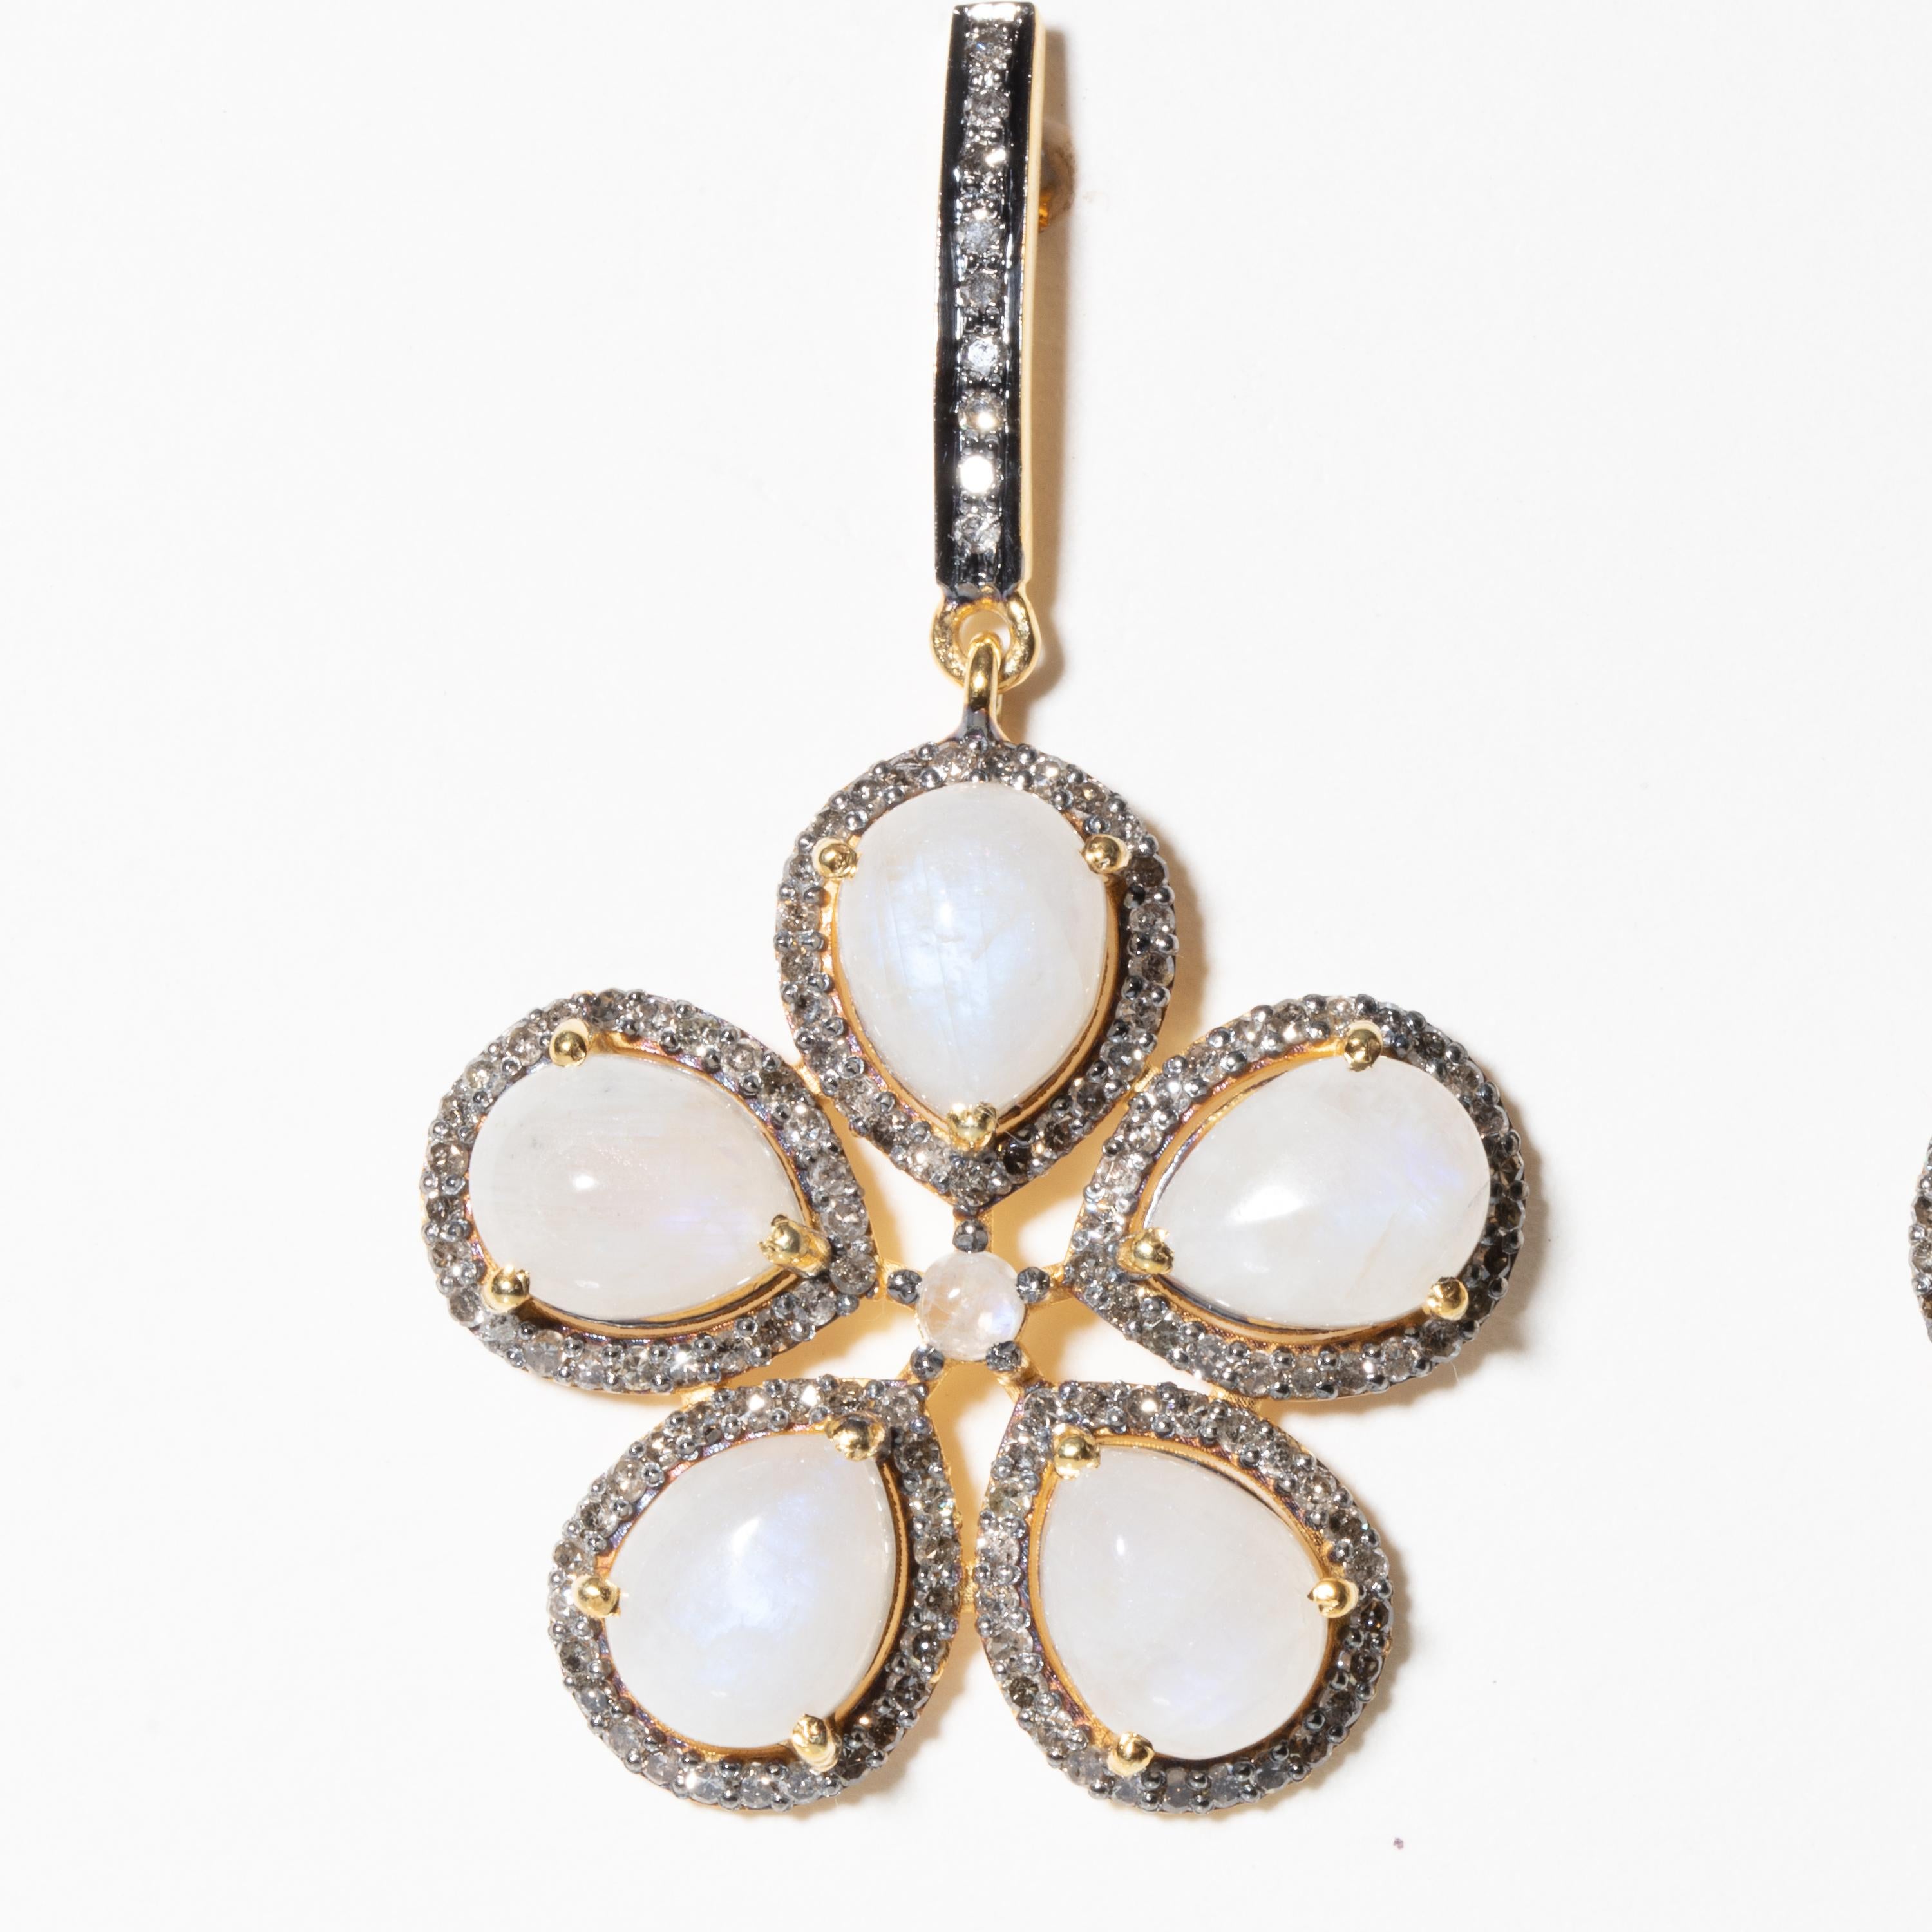 Pear-shaped cabochon moonstones bordered with pave`-set diamonds, and diamonds along the vertical post as well.  Small round cabochon moonstone at center.  Set in sterling silver with 18K gold post.  For pierced ears.  Weight of diamonds is 2.44